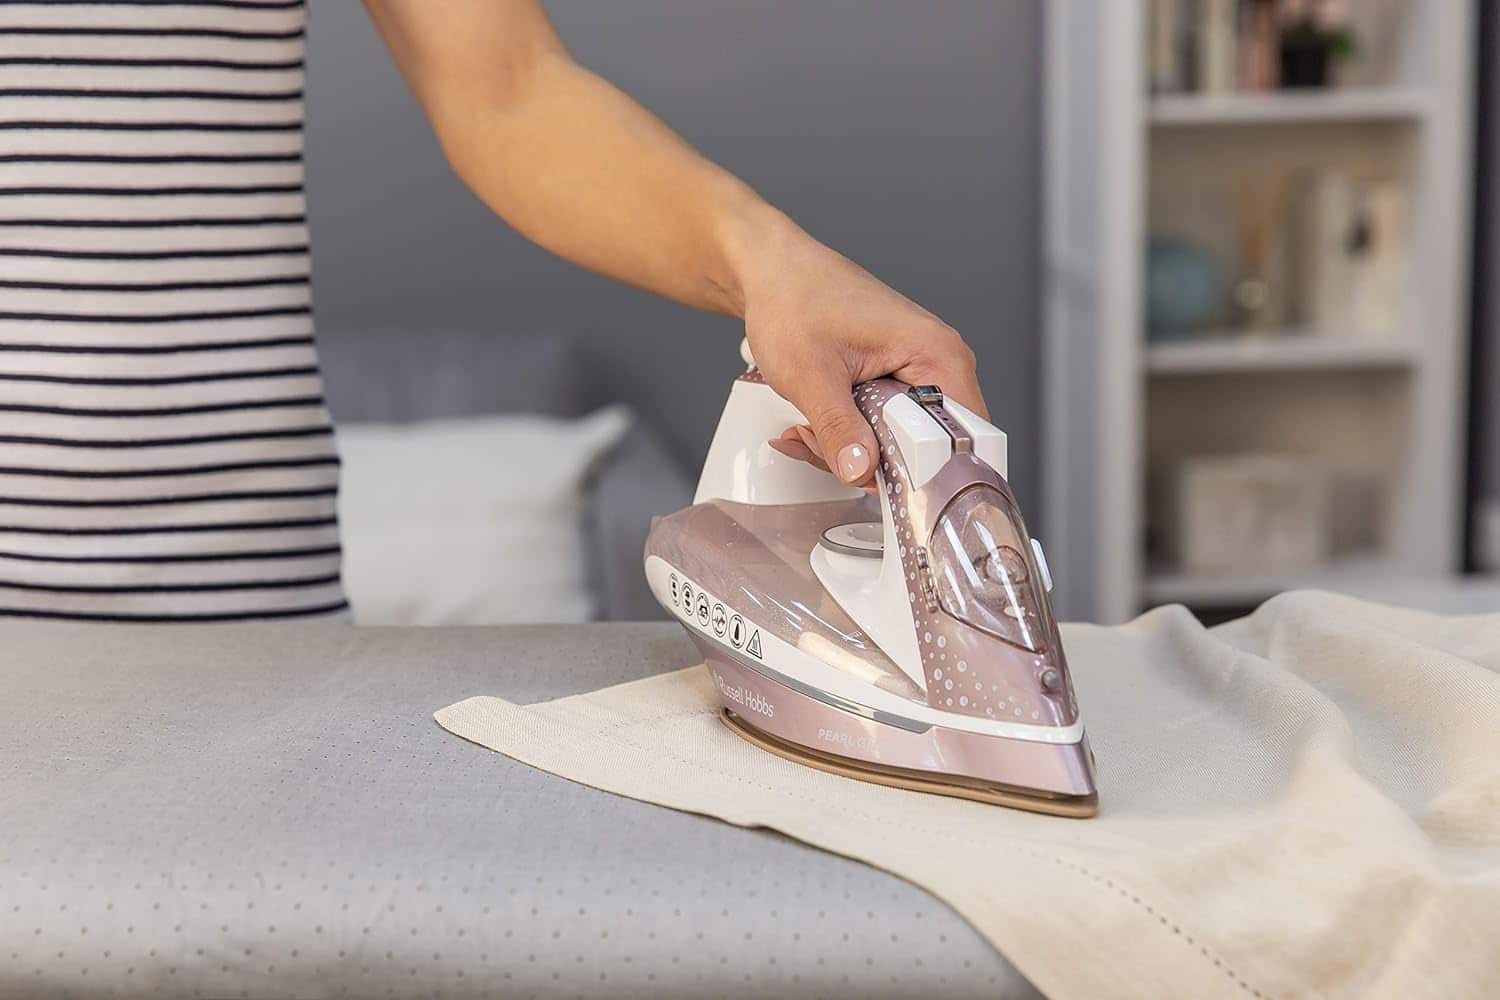 Russell Hobbs 23972 Pearl Glide Steam Iron with Pearl -0146